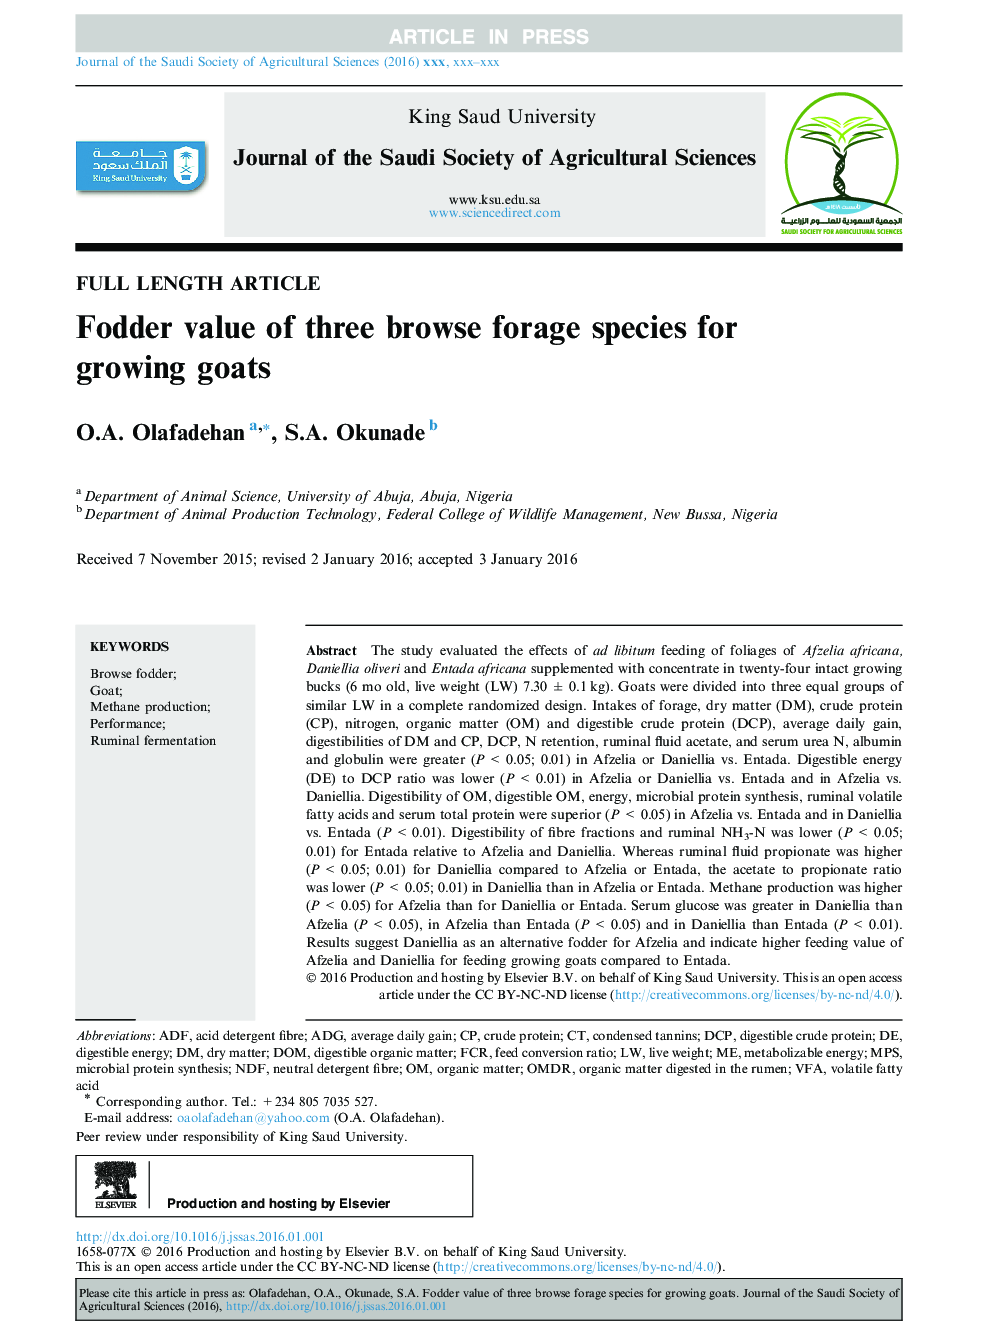 Fodder value of three browse forage species for growing goats